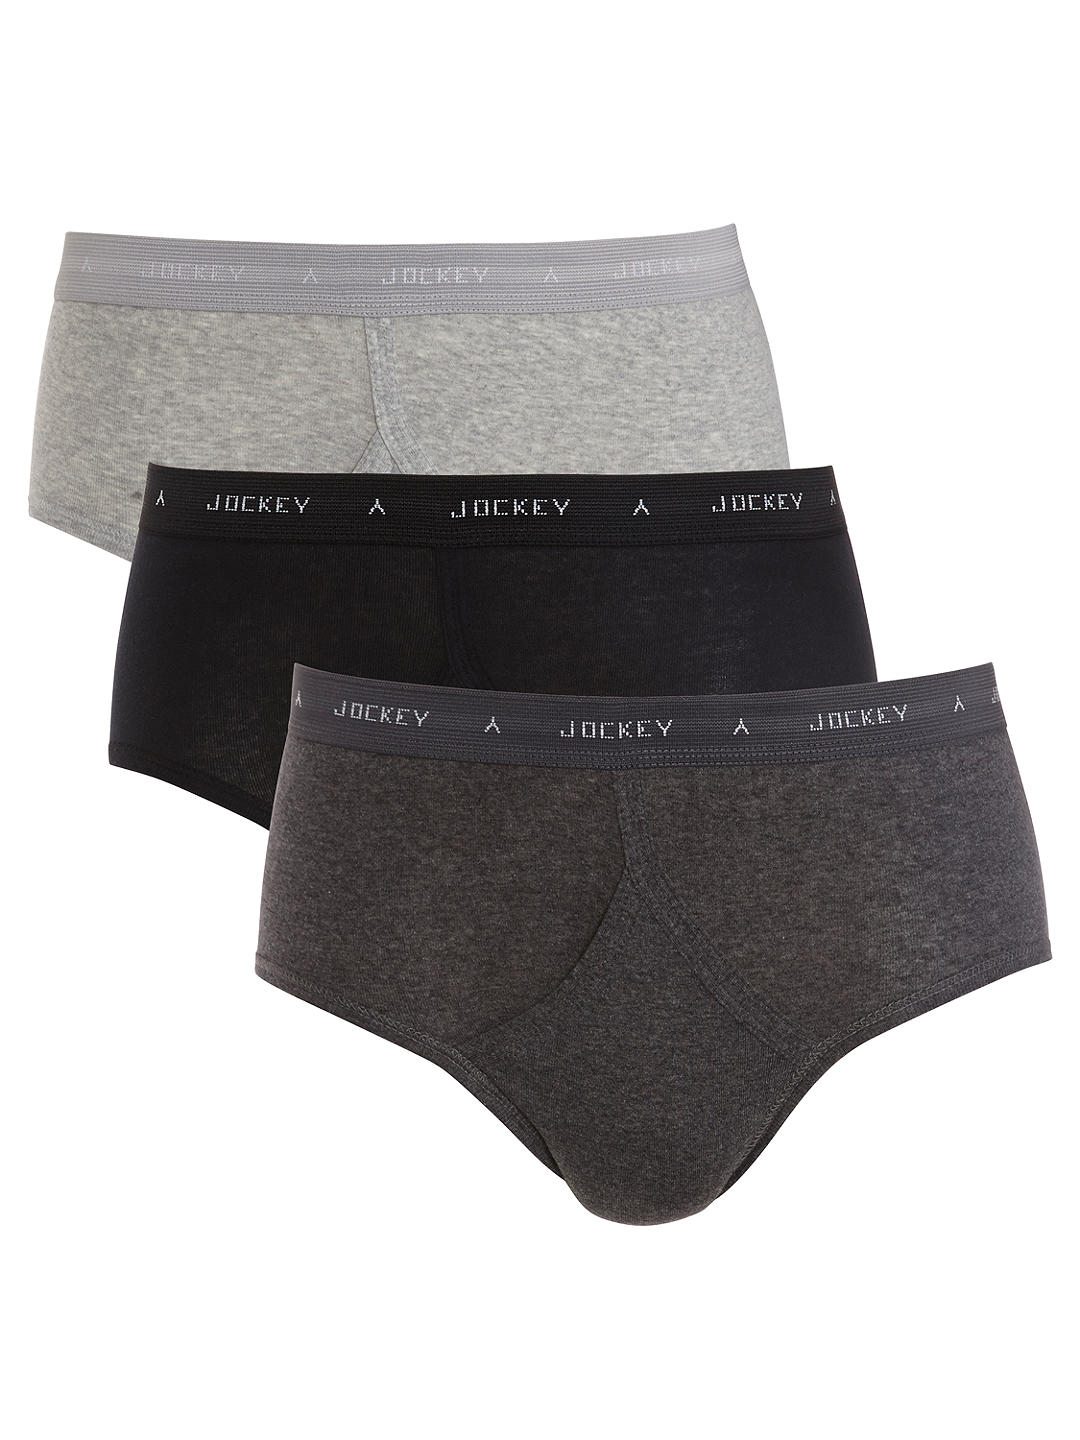 Jockey Classic Y-Front Briefs, Pack of 3, Grey/Black/Charcoal